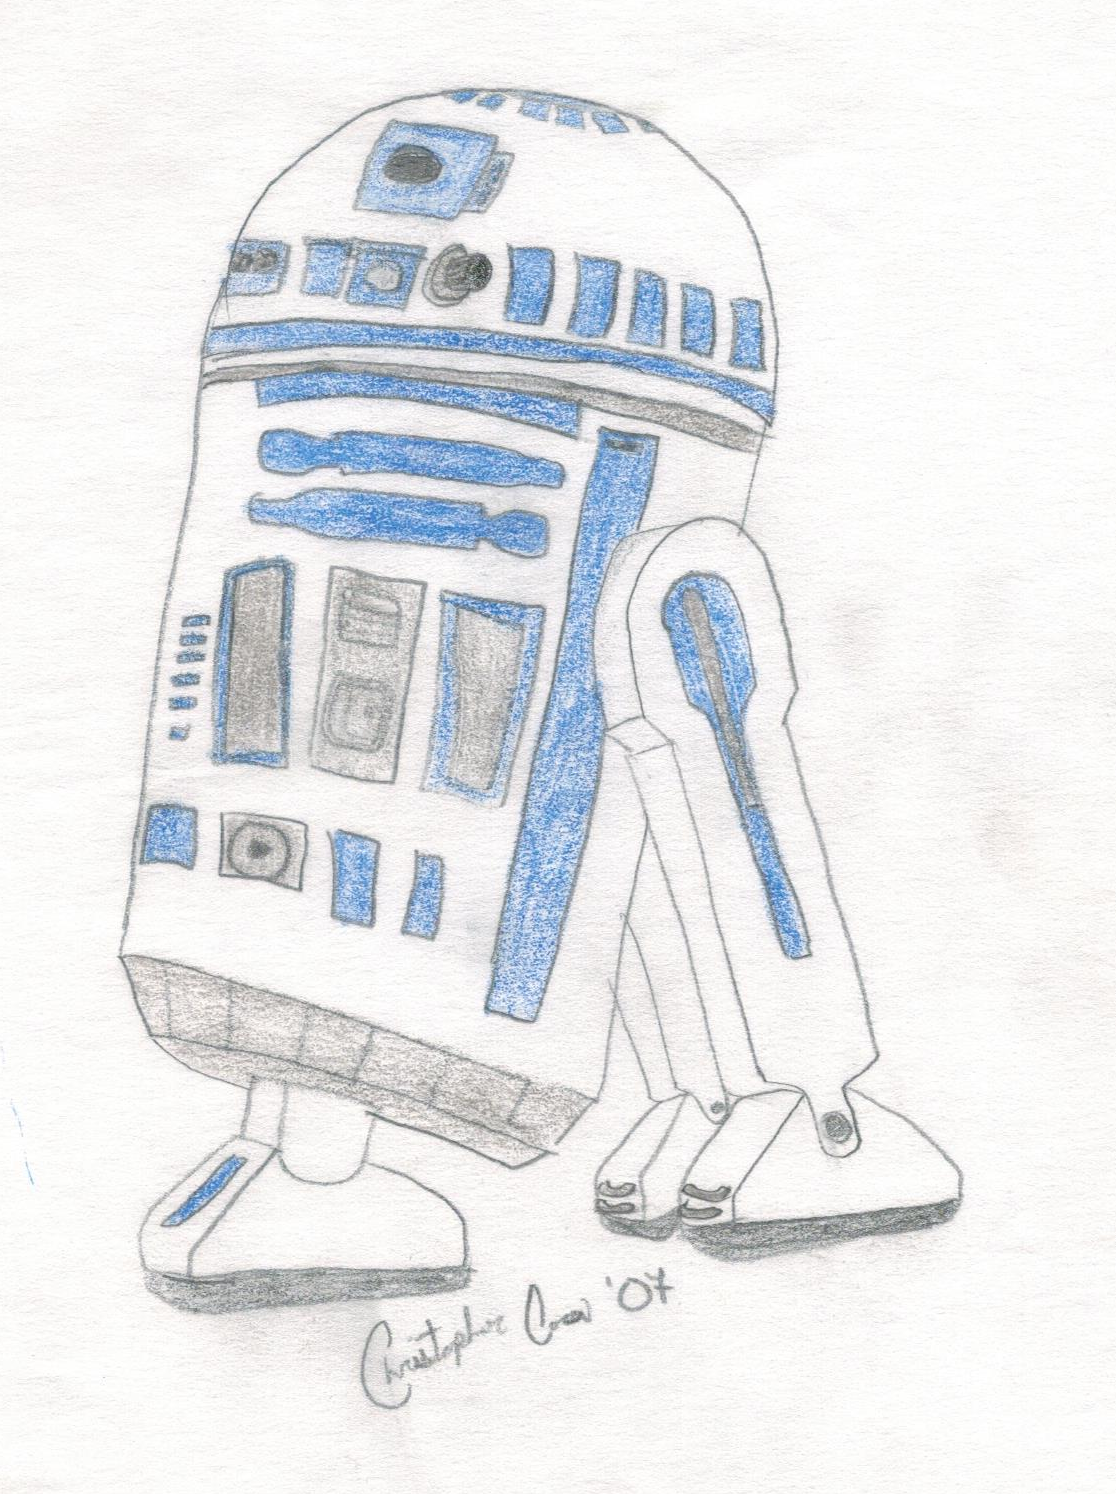 r2d2.png